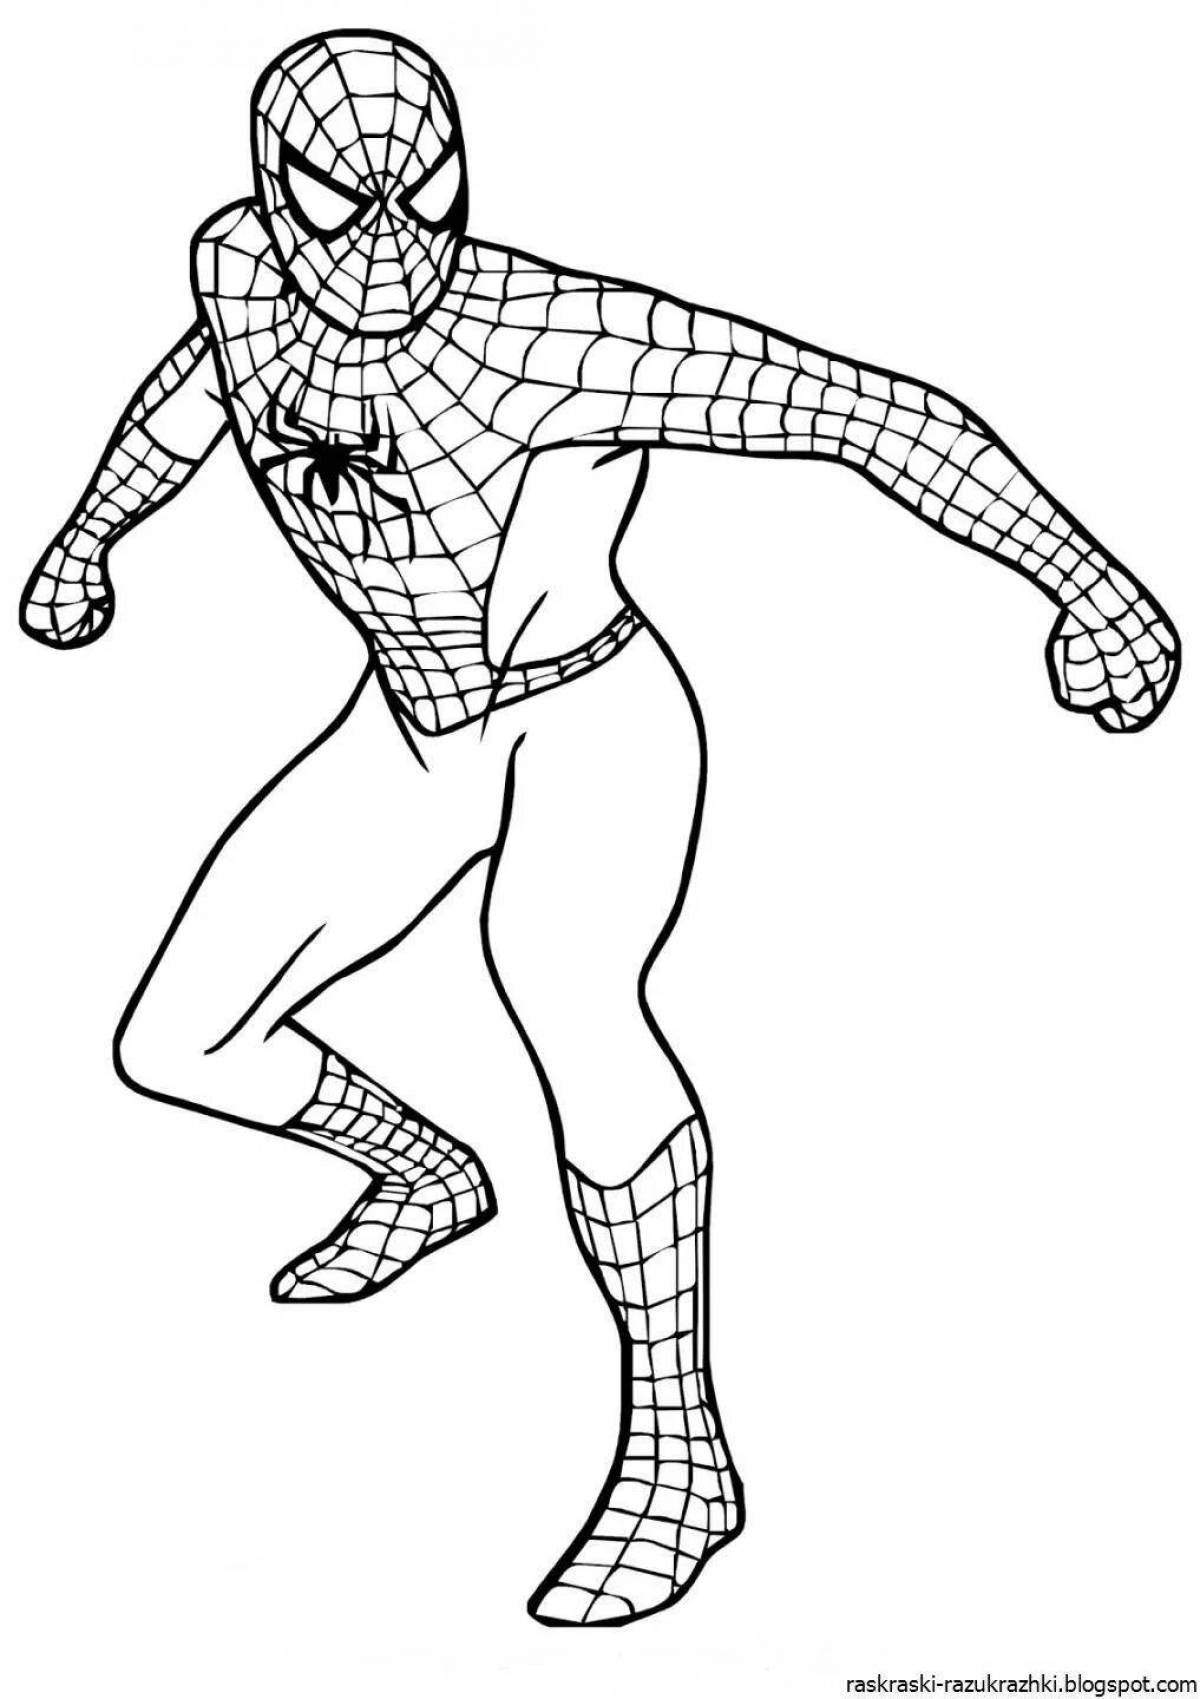 Funny superheroes coloring pages for kids 6-7 years old